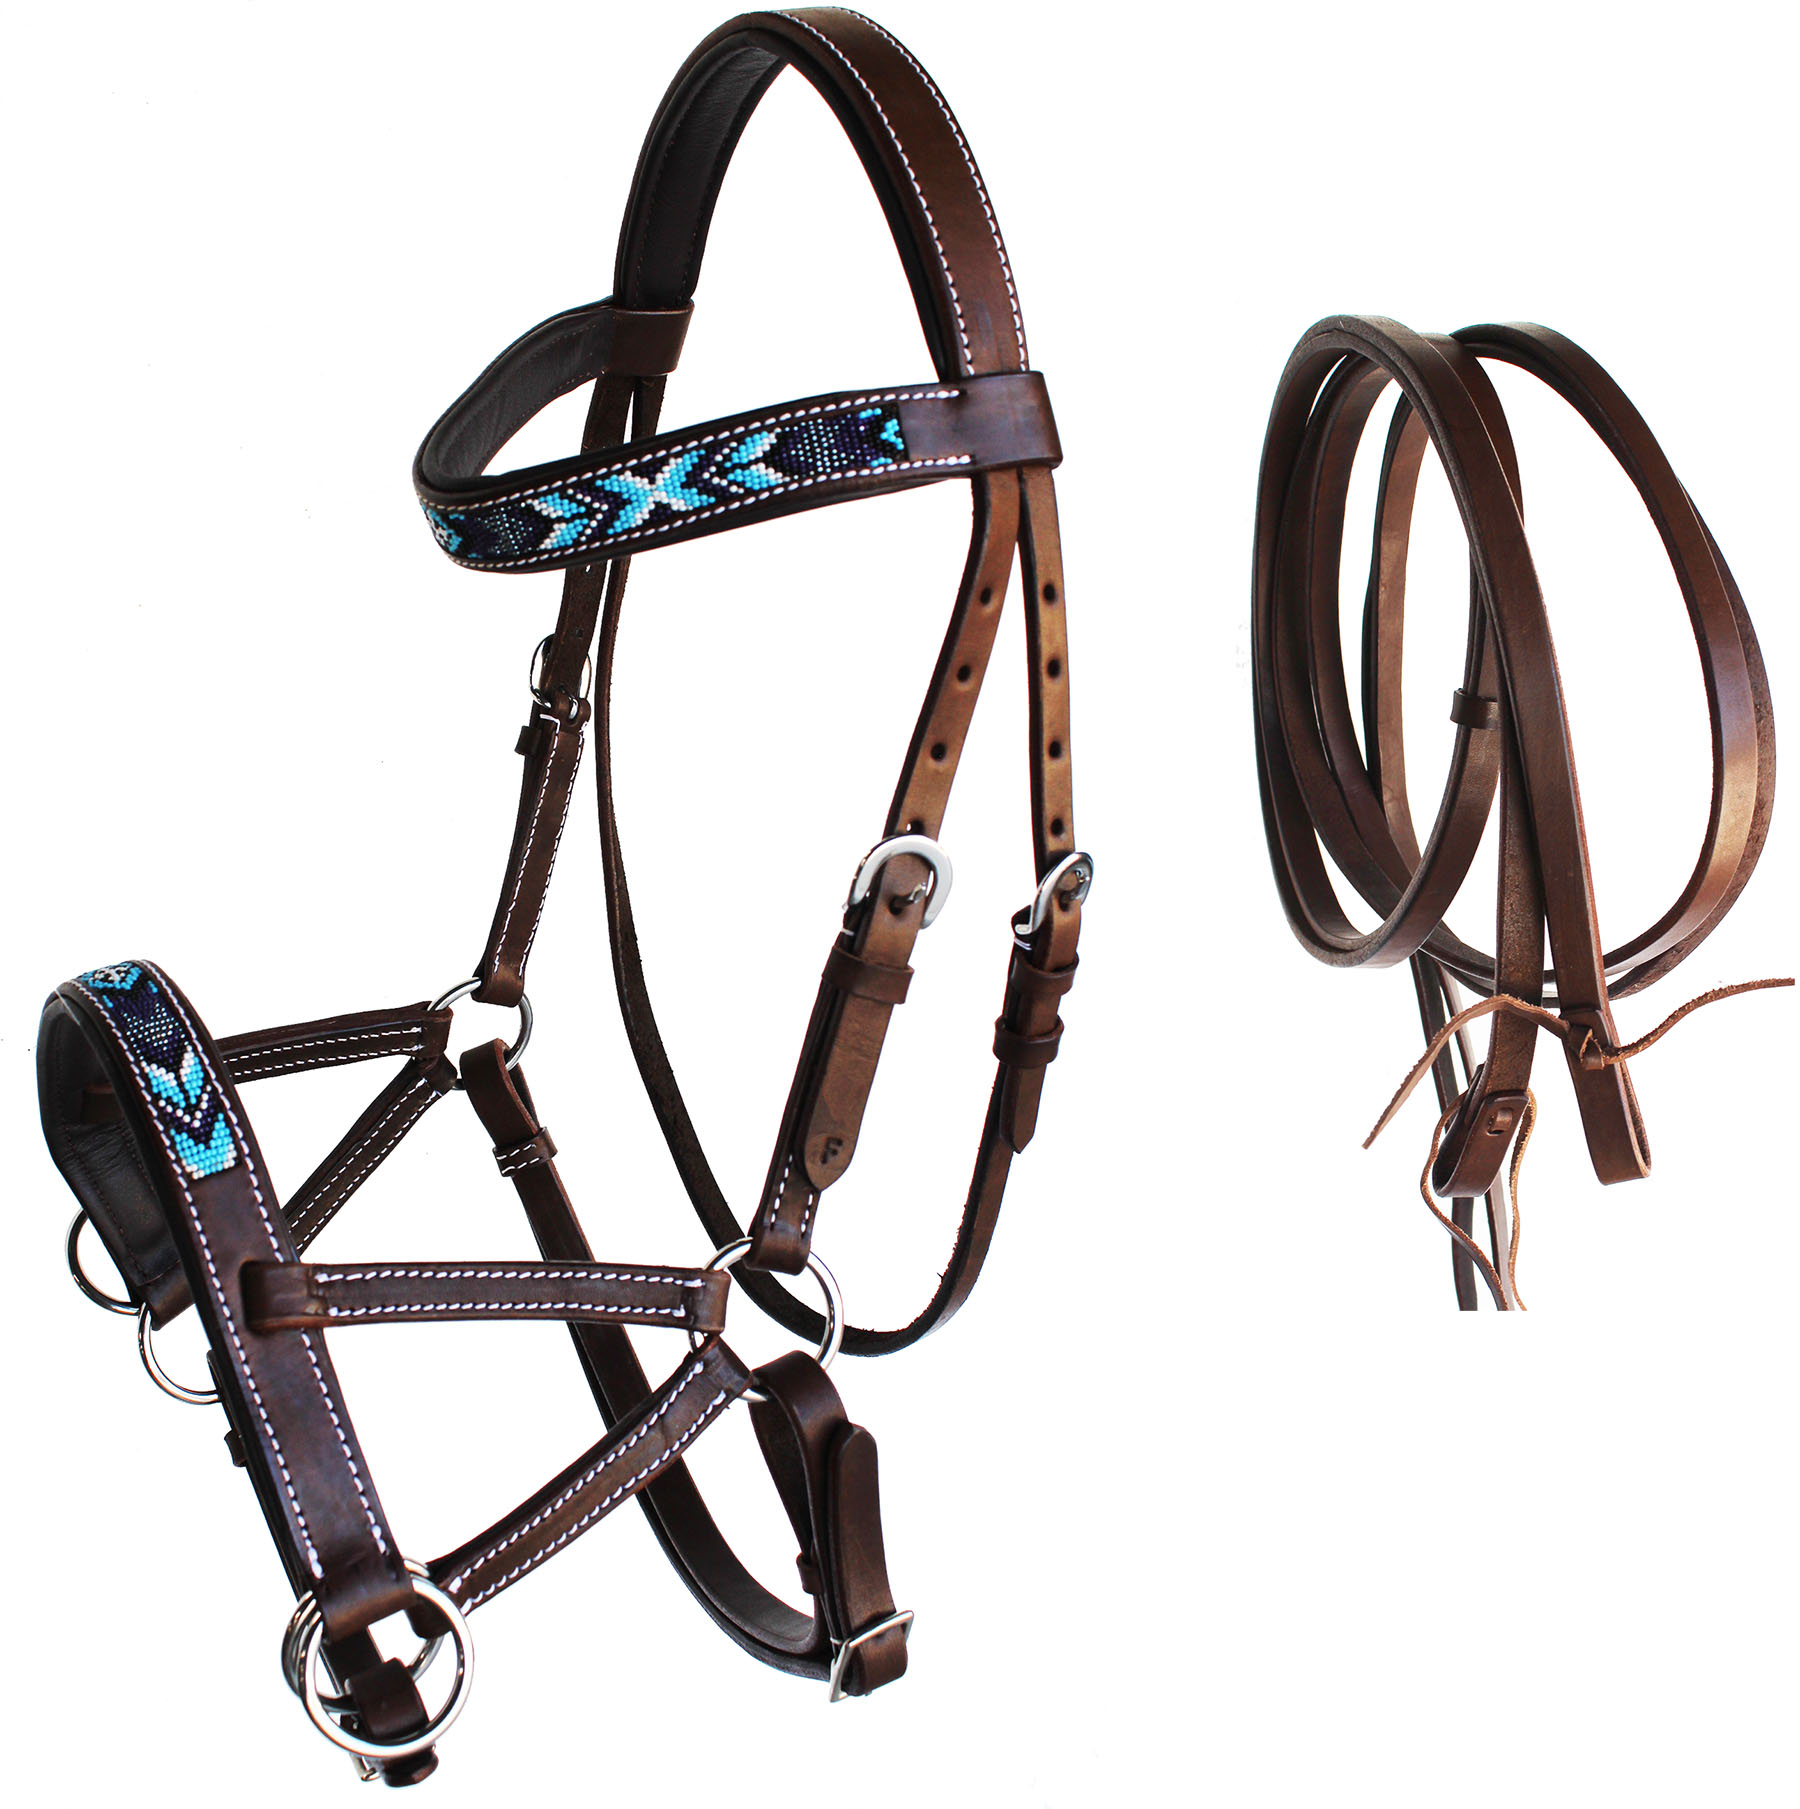 WESTERN OR ENGLISH SADDLE HORSE BROWN LEATHER BITLESS HEADSTALL BRIDLE SIDE PULL